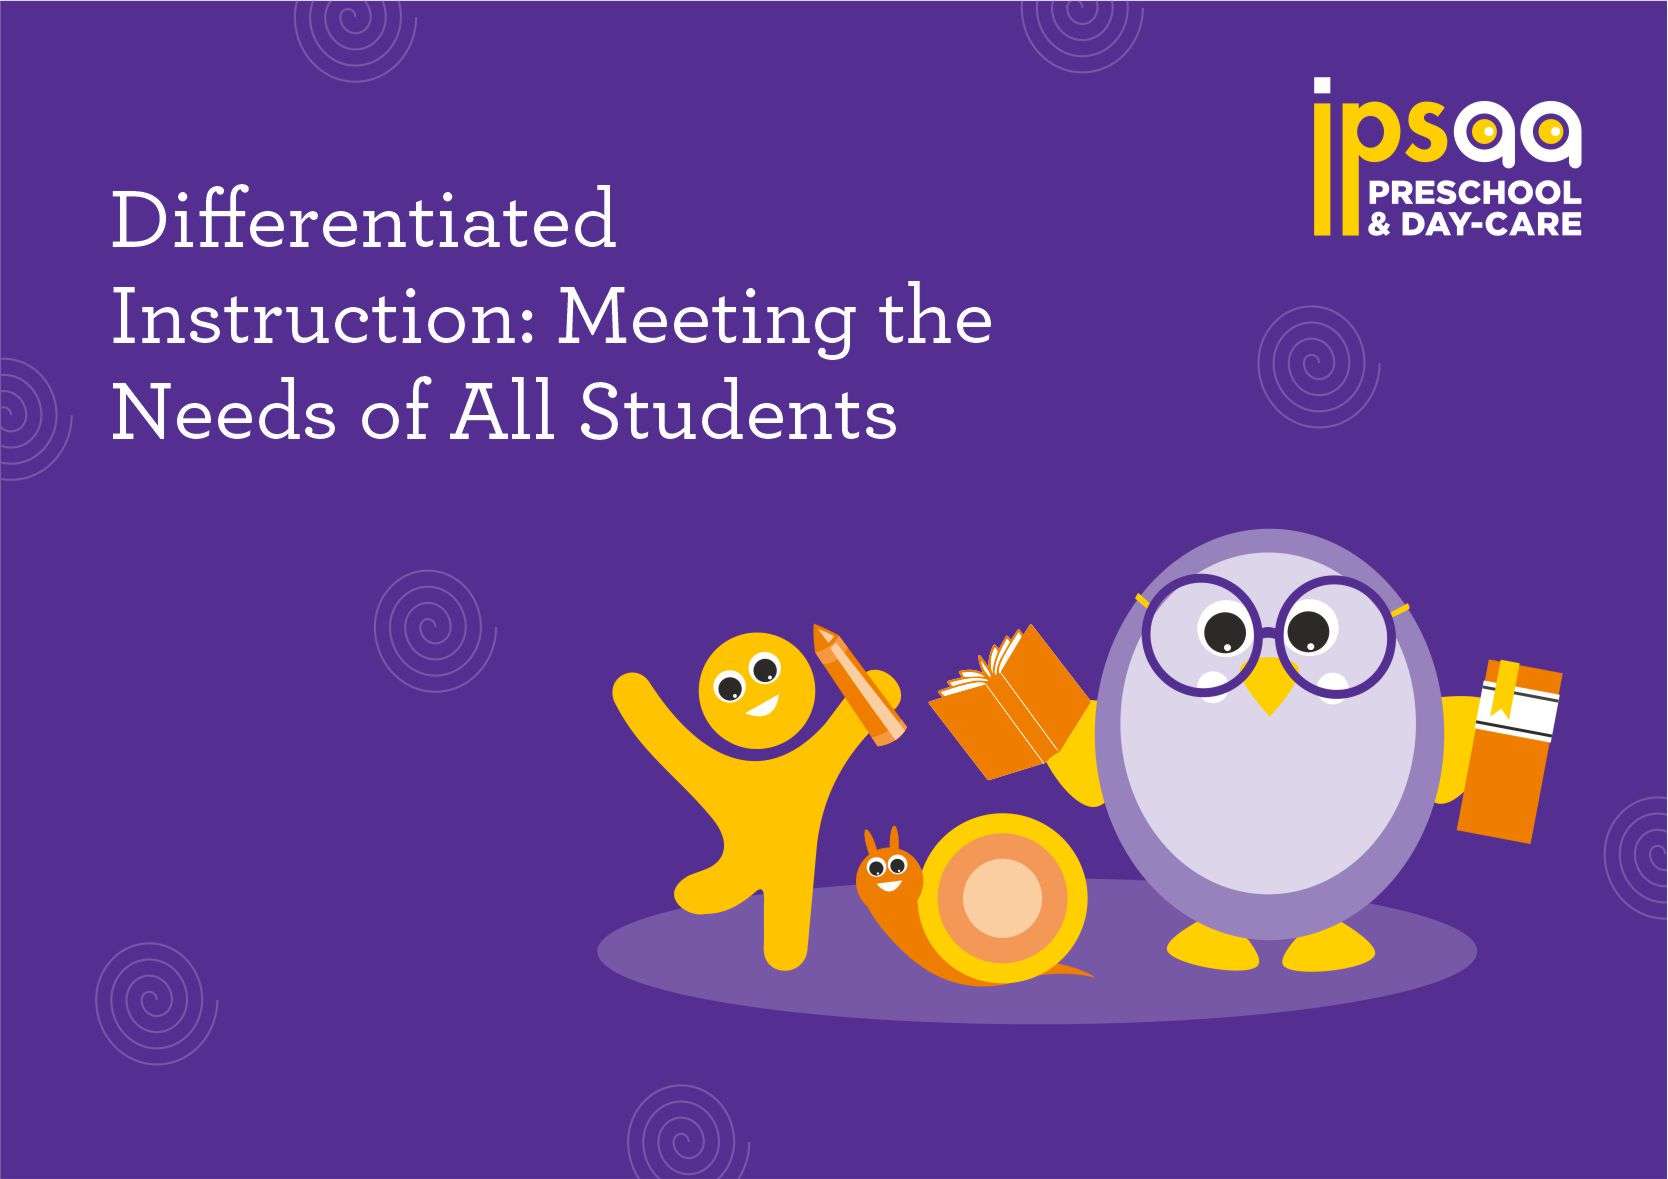 Differentiated Instruction: Meeting the Needs of All Students